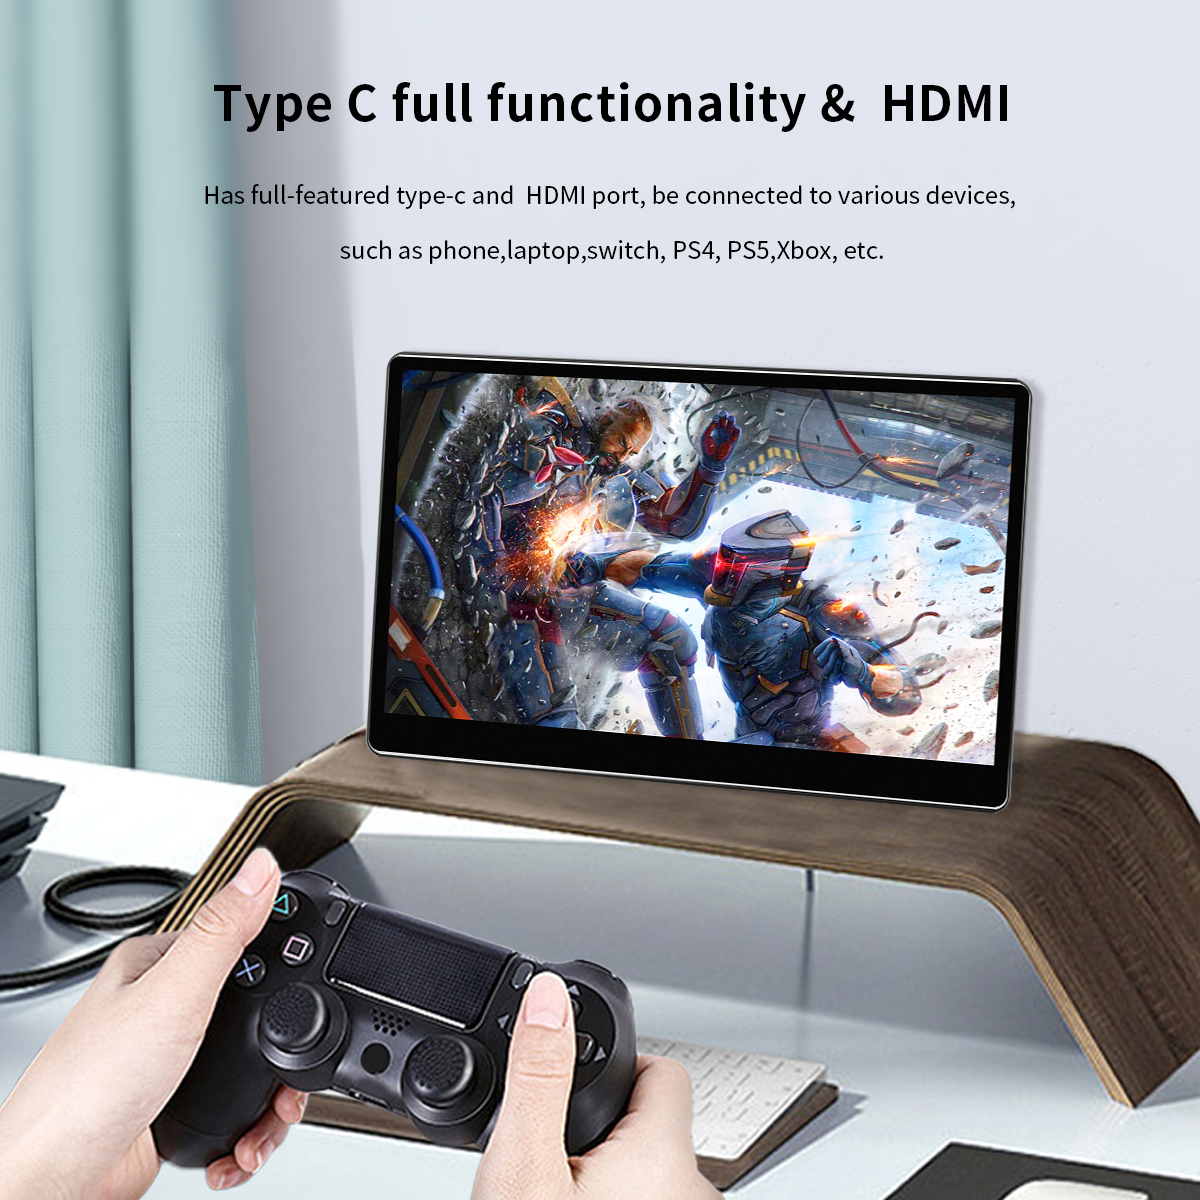 Portable Monitor for Daily Work or Game Scene Display with Rotatable Bracket/15.6 Inch HDR Touchscreen/HDMI,2 Type-C Ports,2 USB Ports/ Compatible with Laptops, PC, MAC and Phones